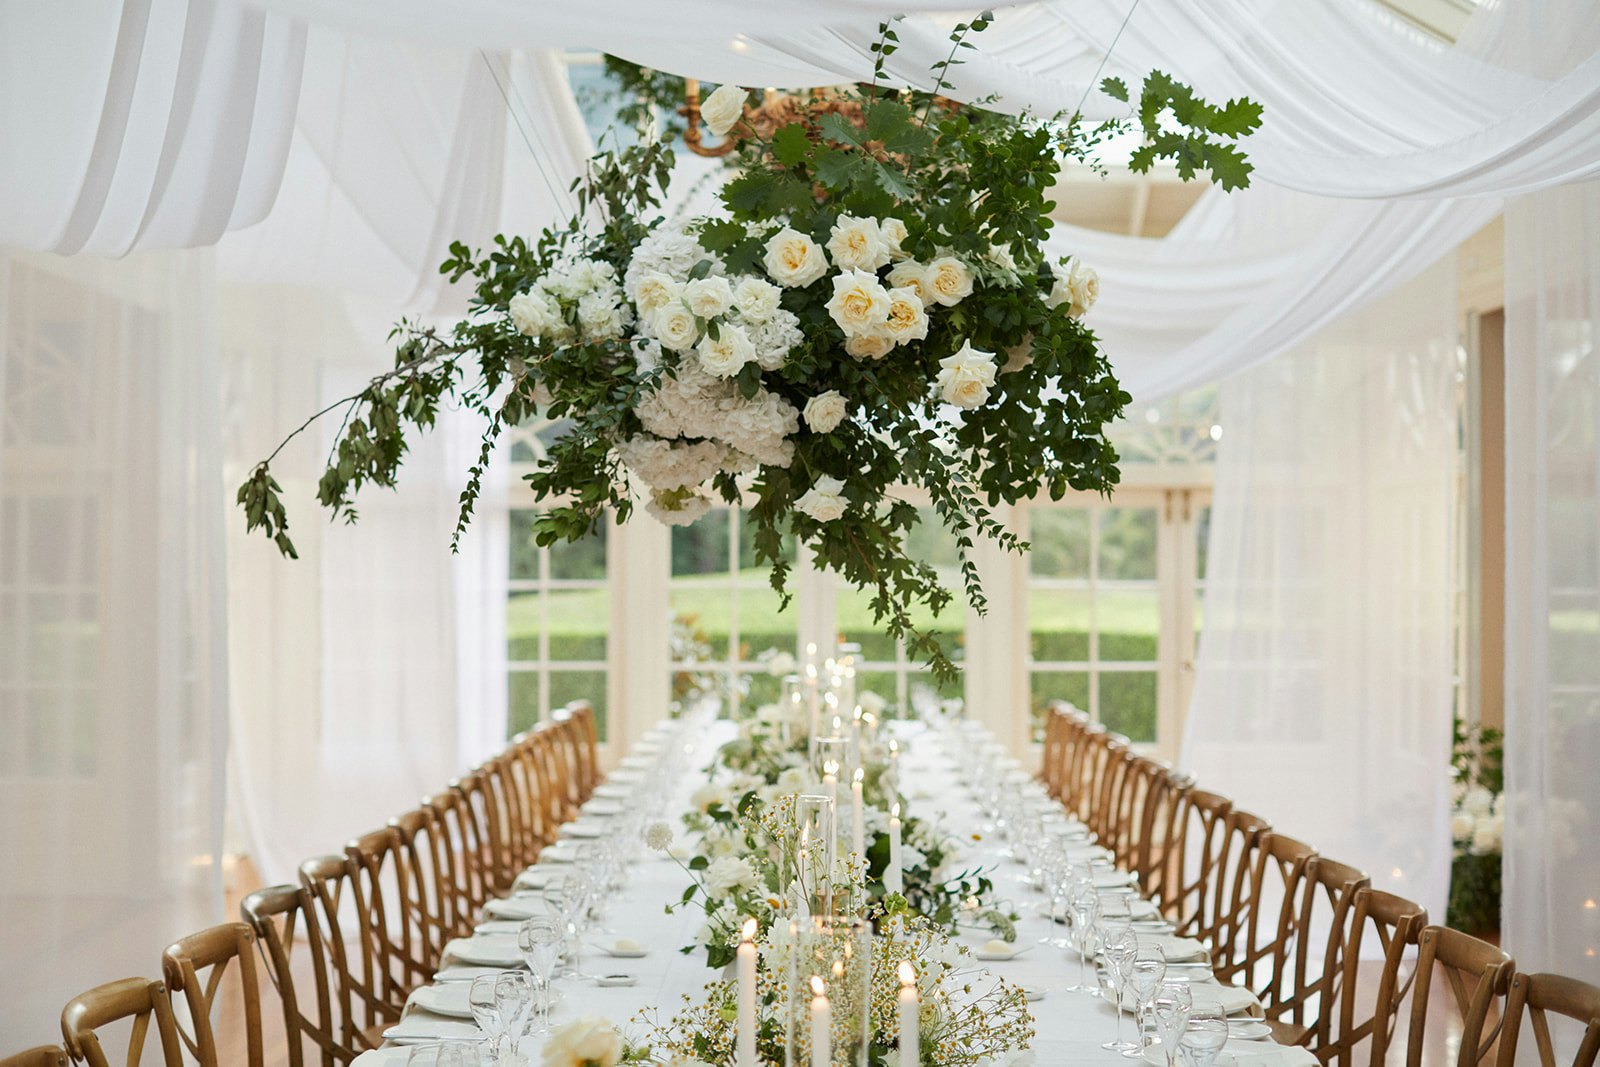 Wedding reception with flowers and white draping linen